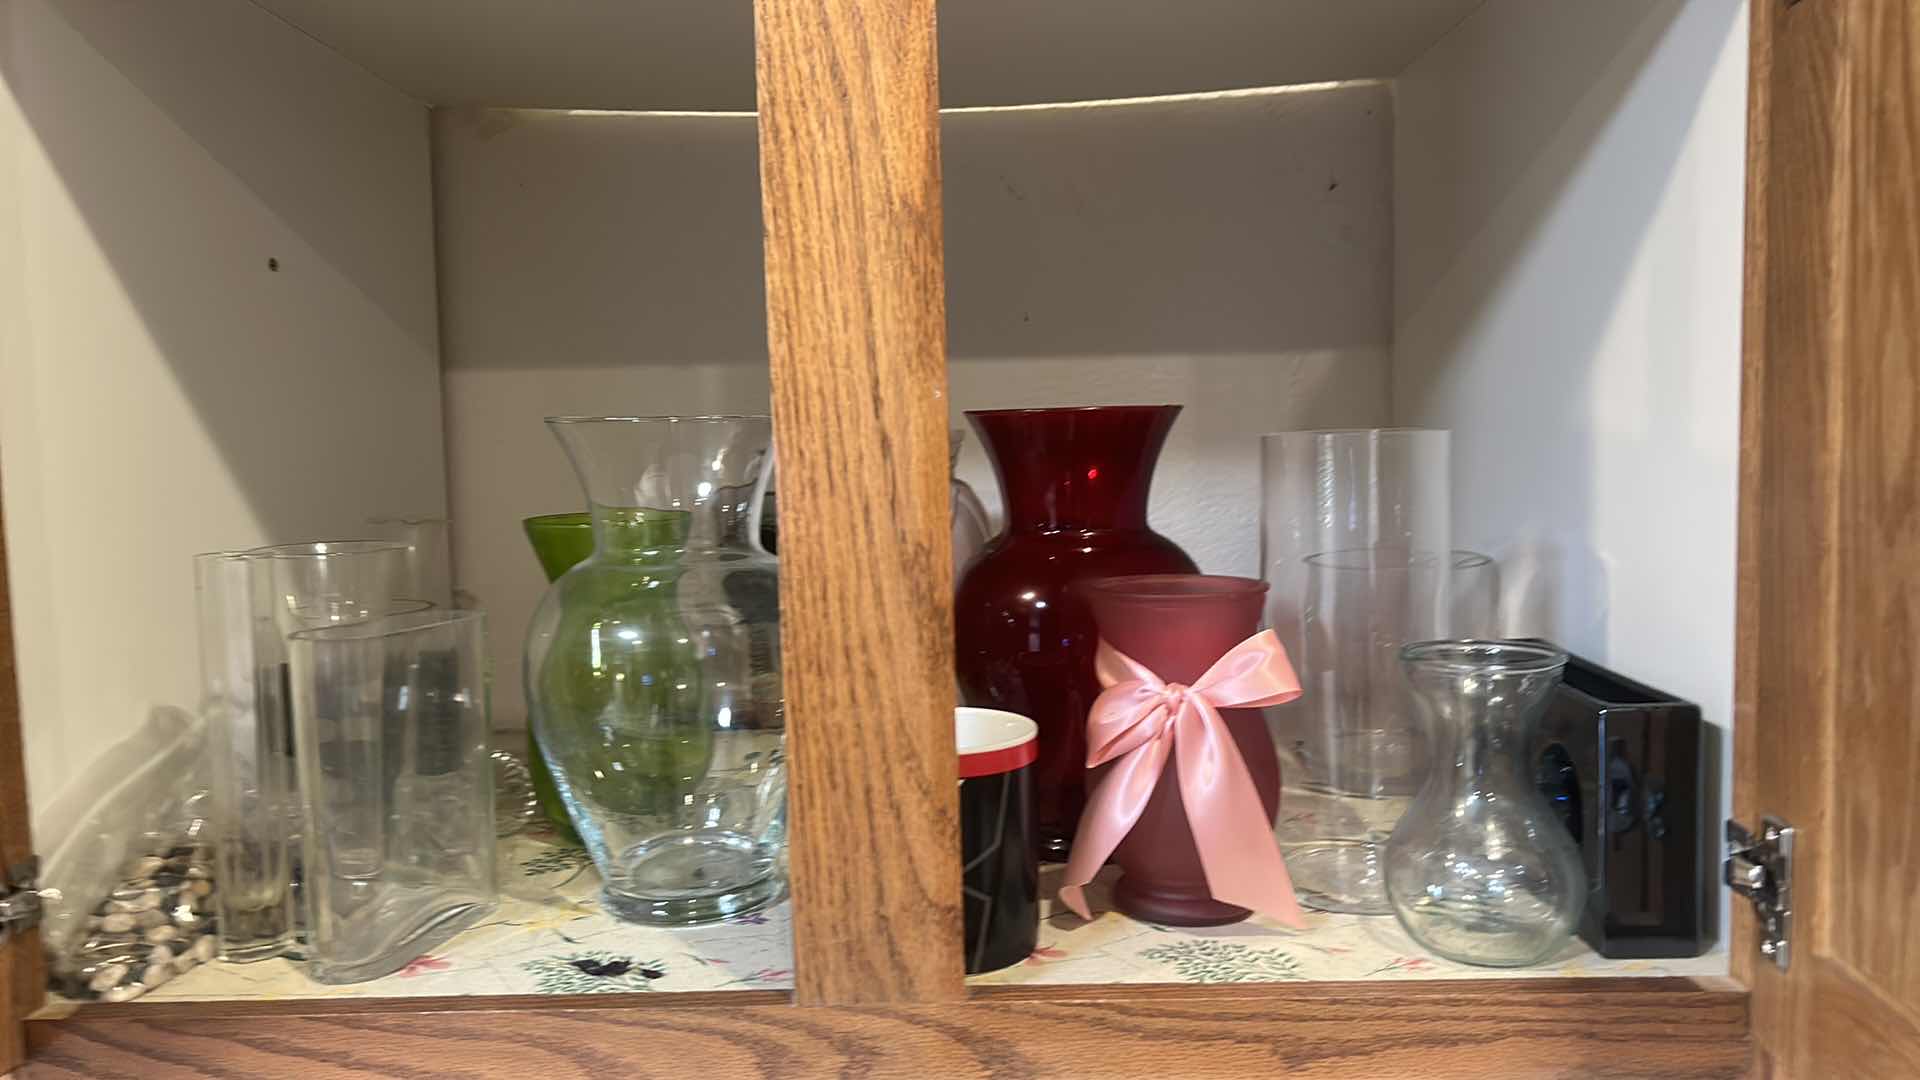 Photo 1 of CONTENTS OF CABINET IN KITCHEN- VASES